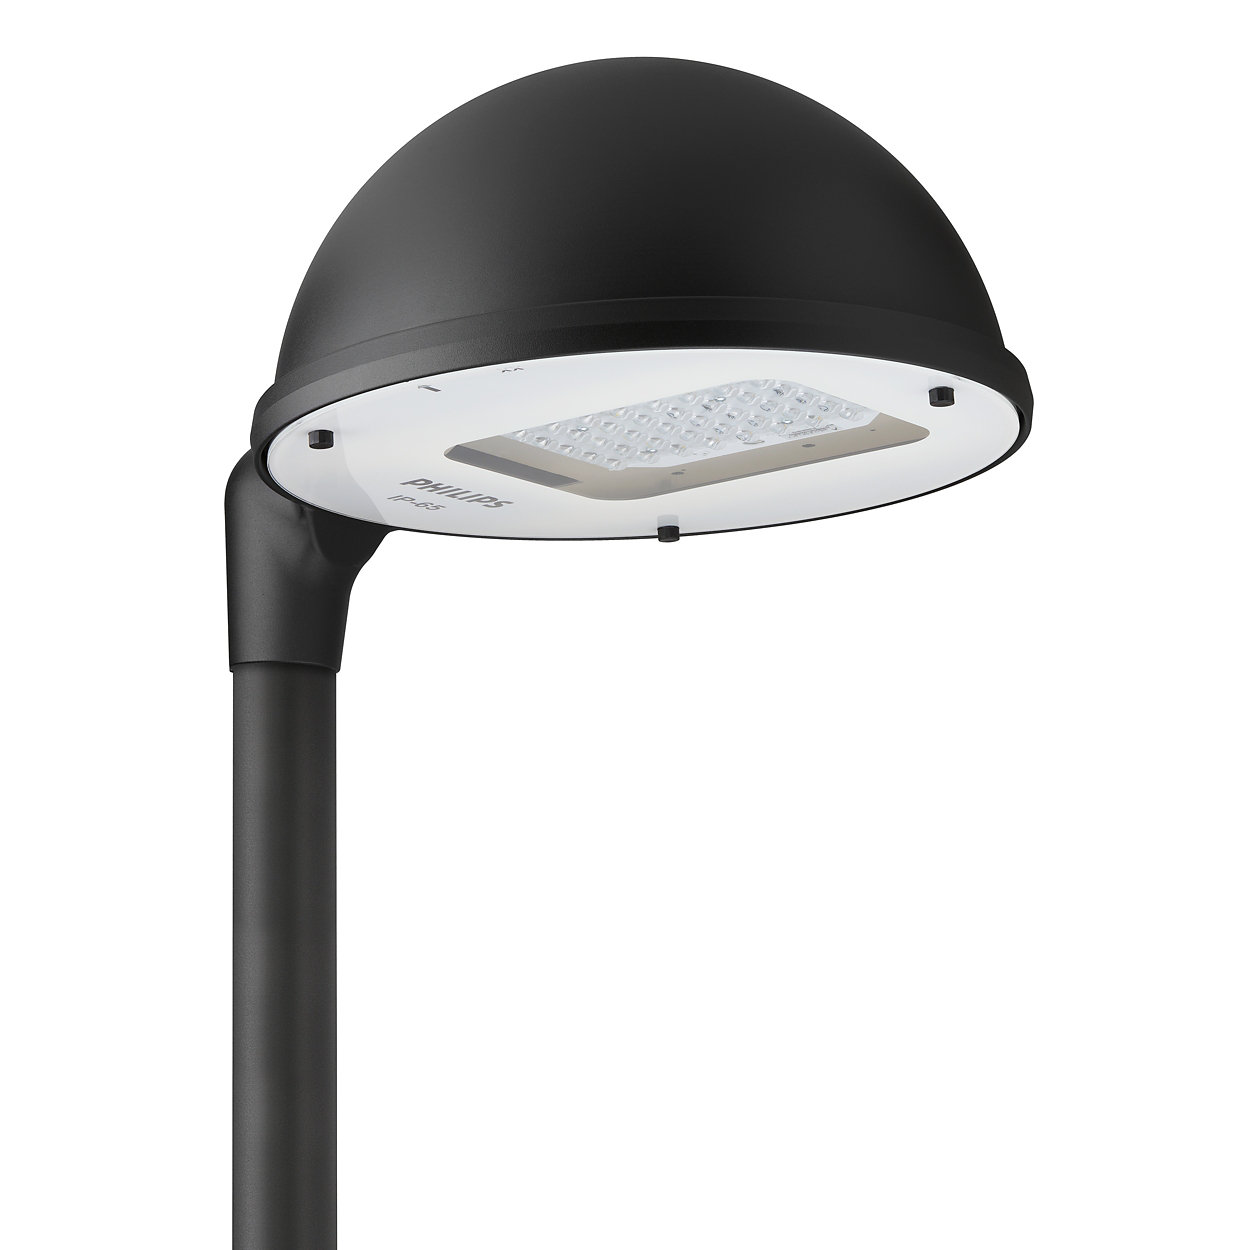 Quebec LED – setting the standard in outdoor lighting